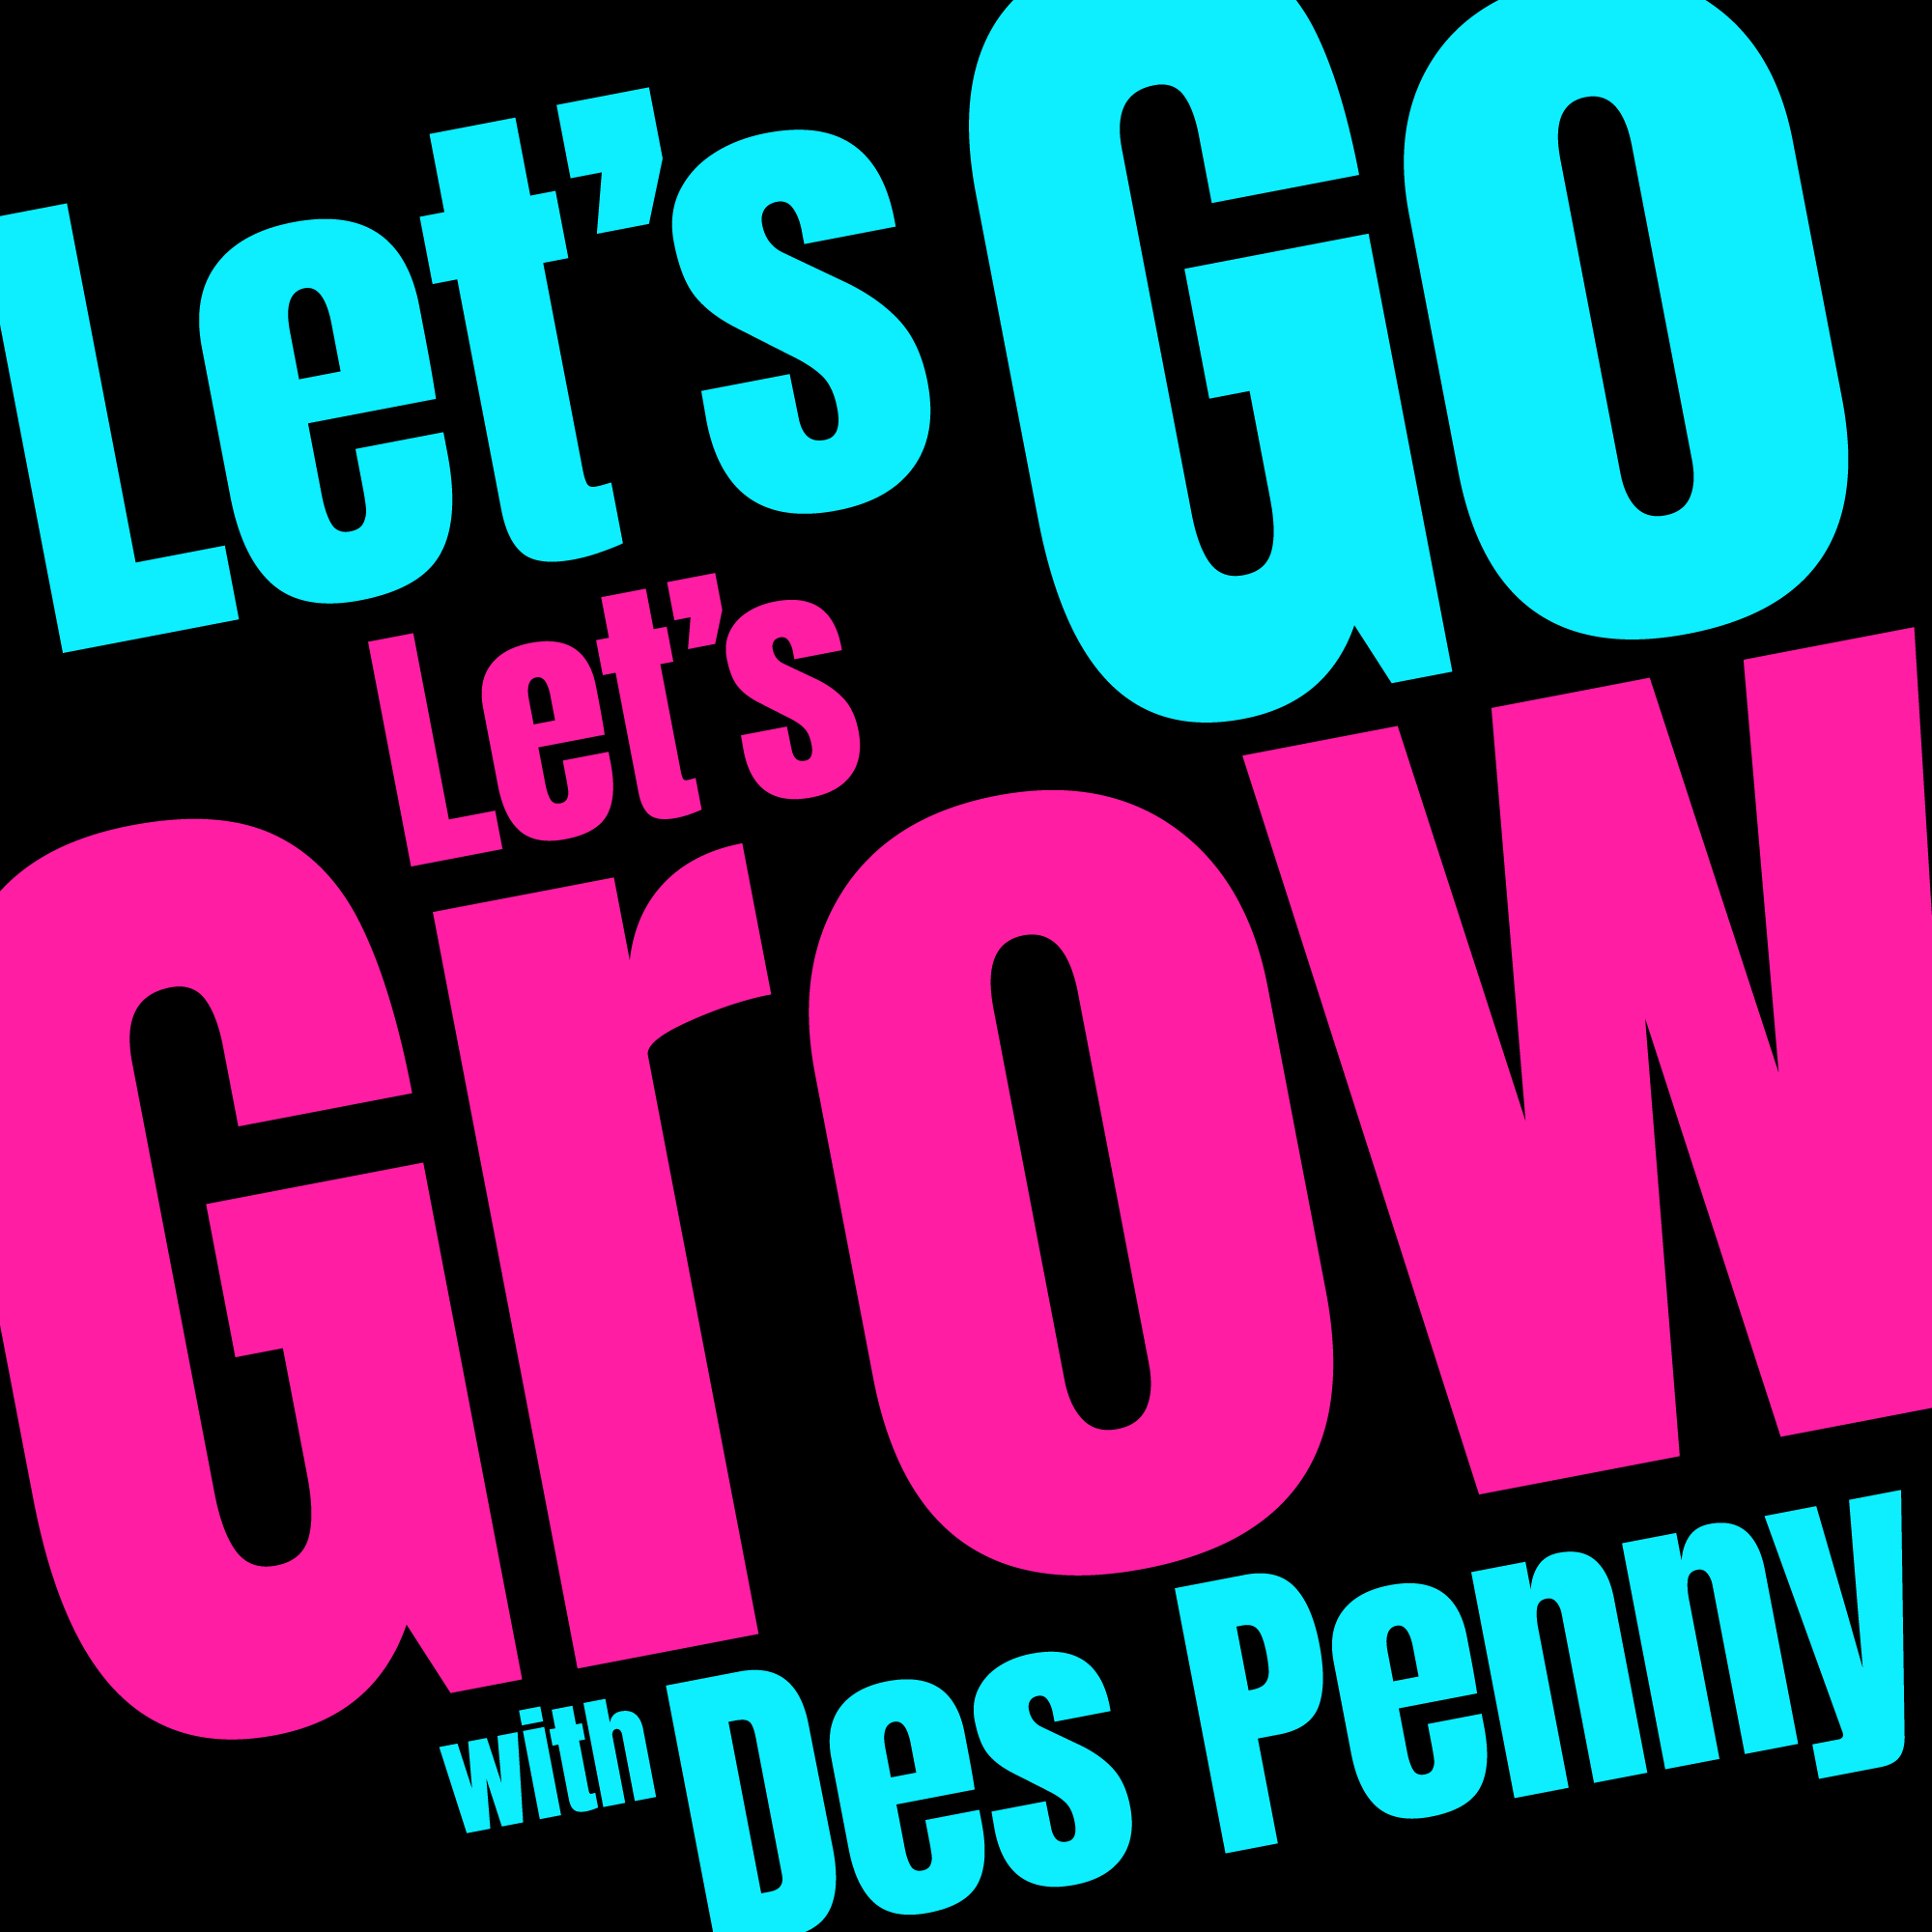 Let's Go Let's Grow Podcast